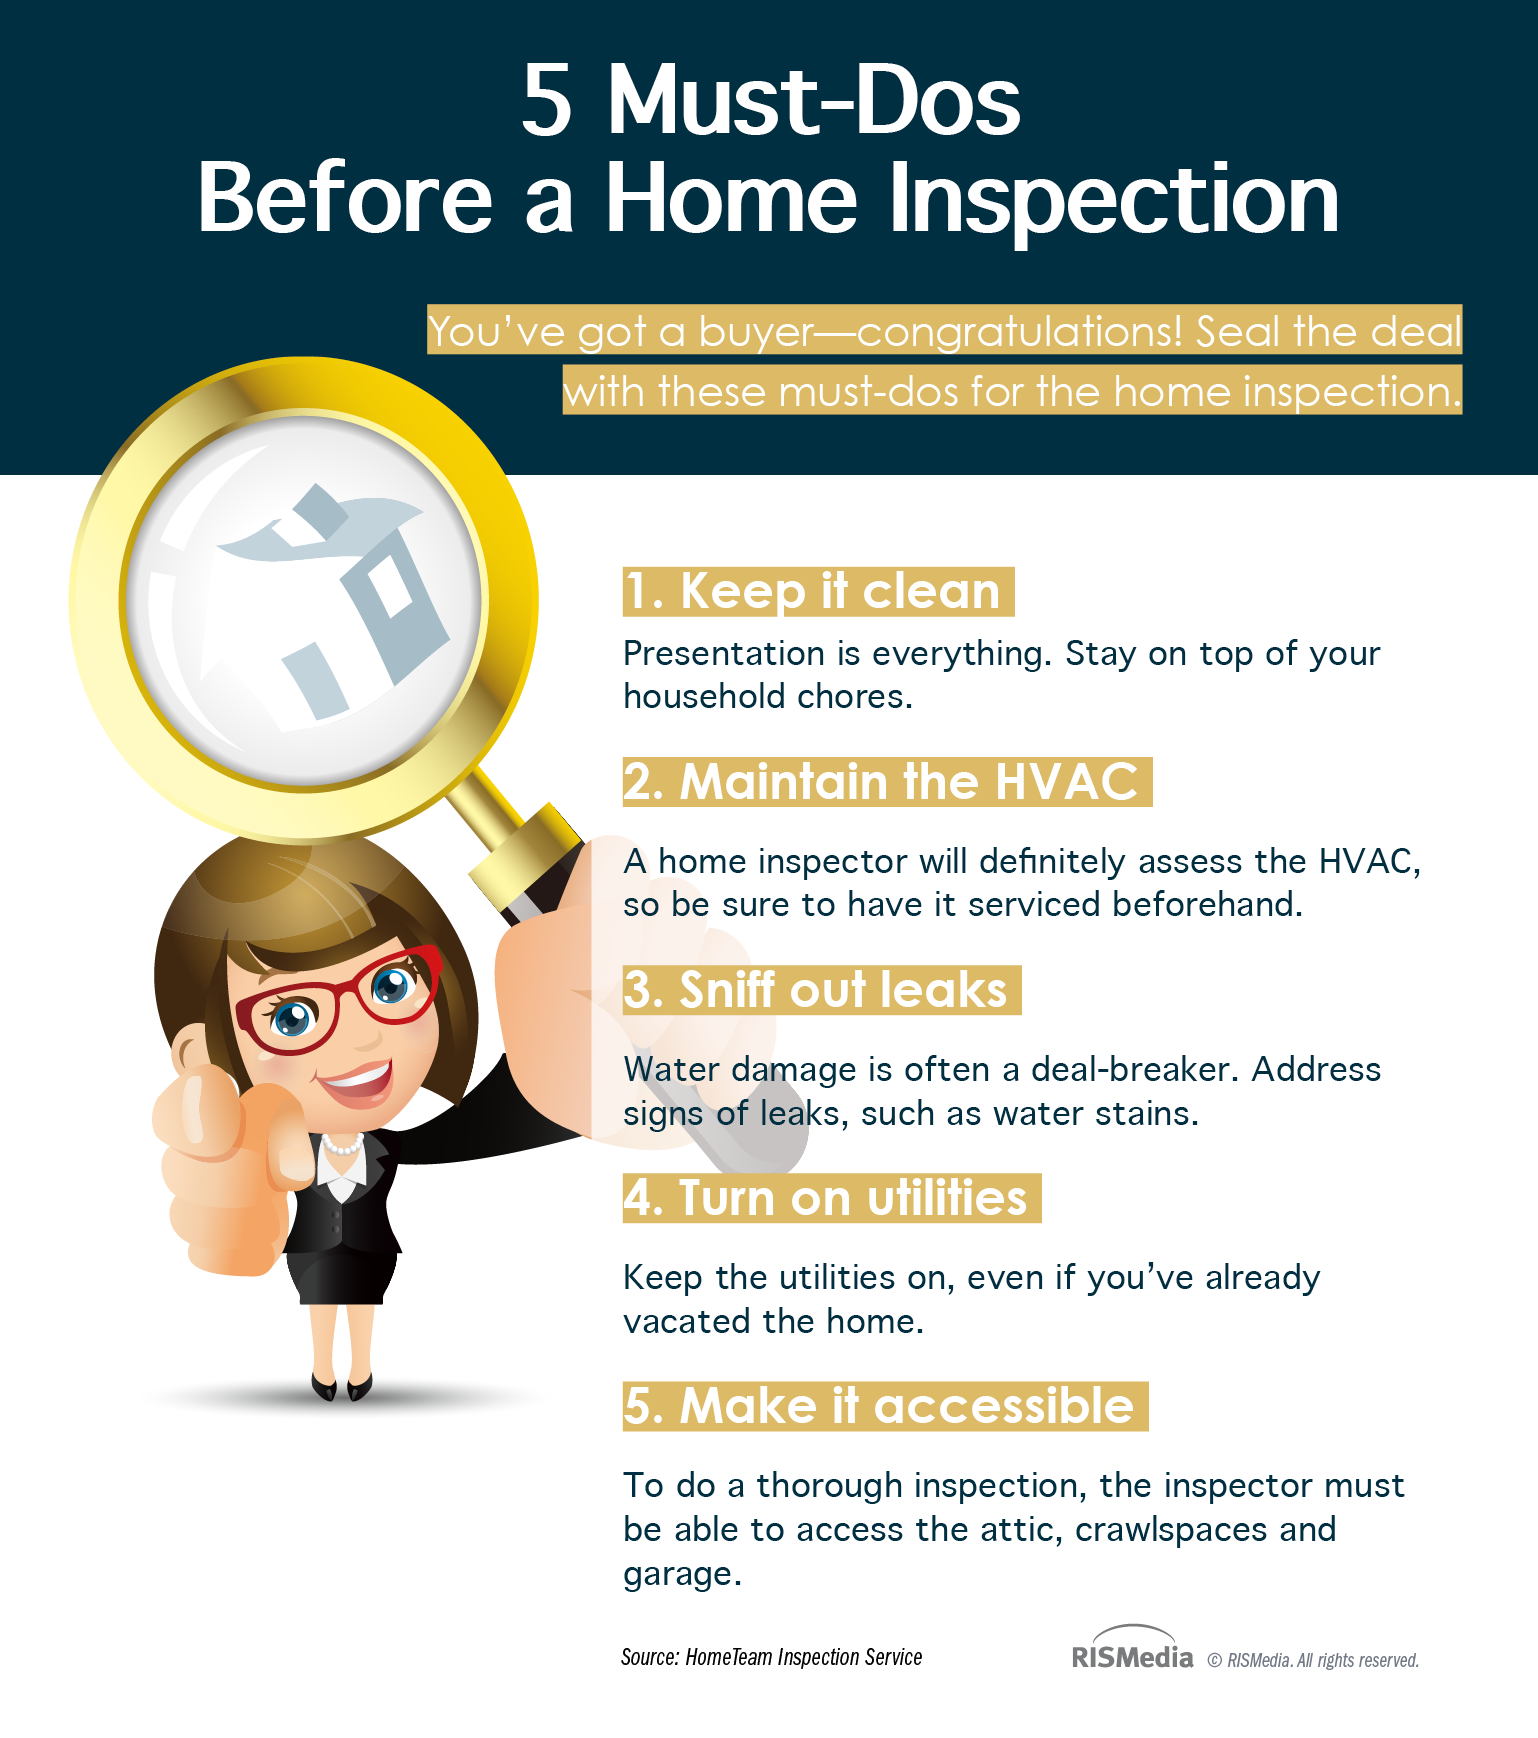 5 Must-Dos Before a Home Inspection